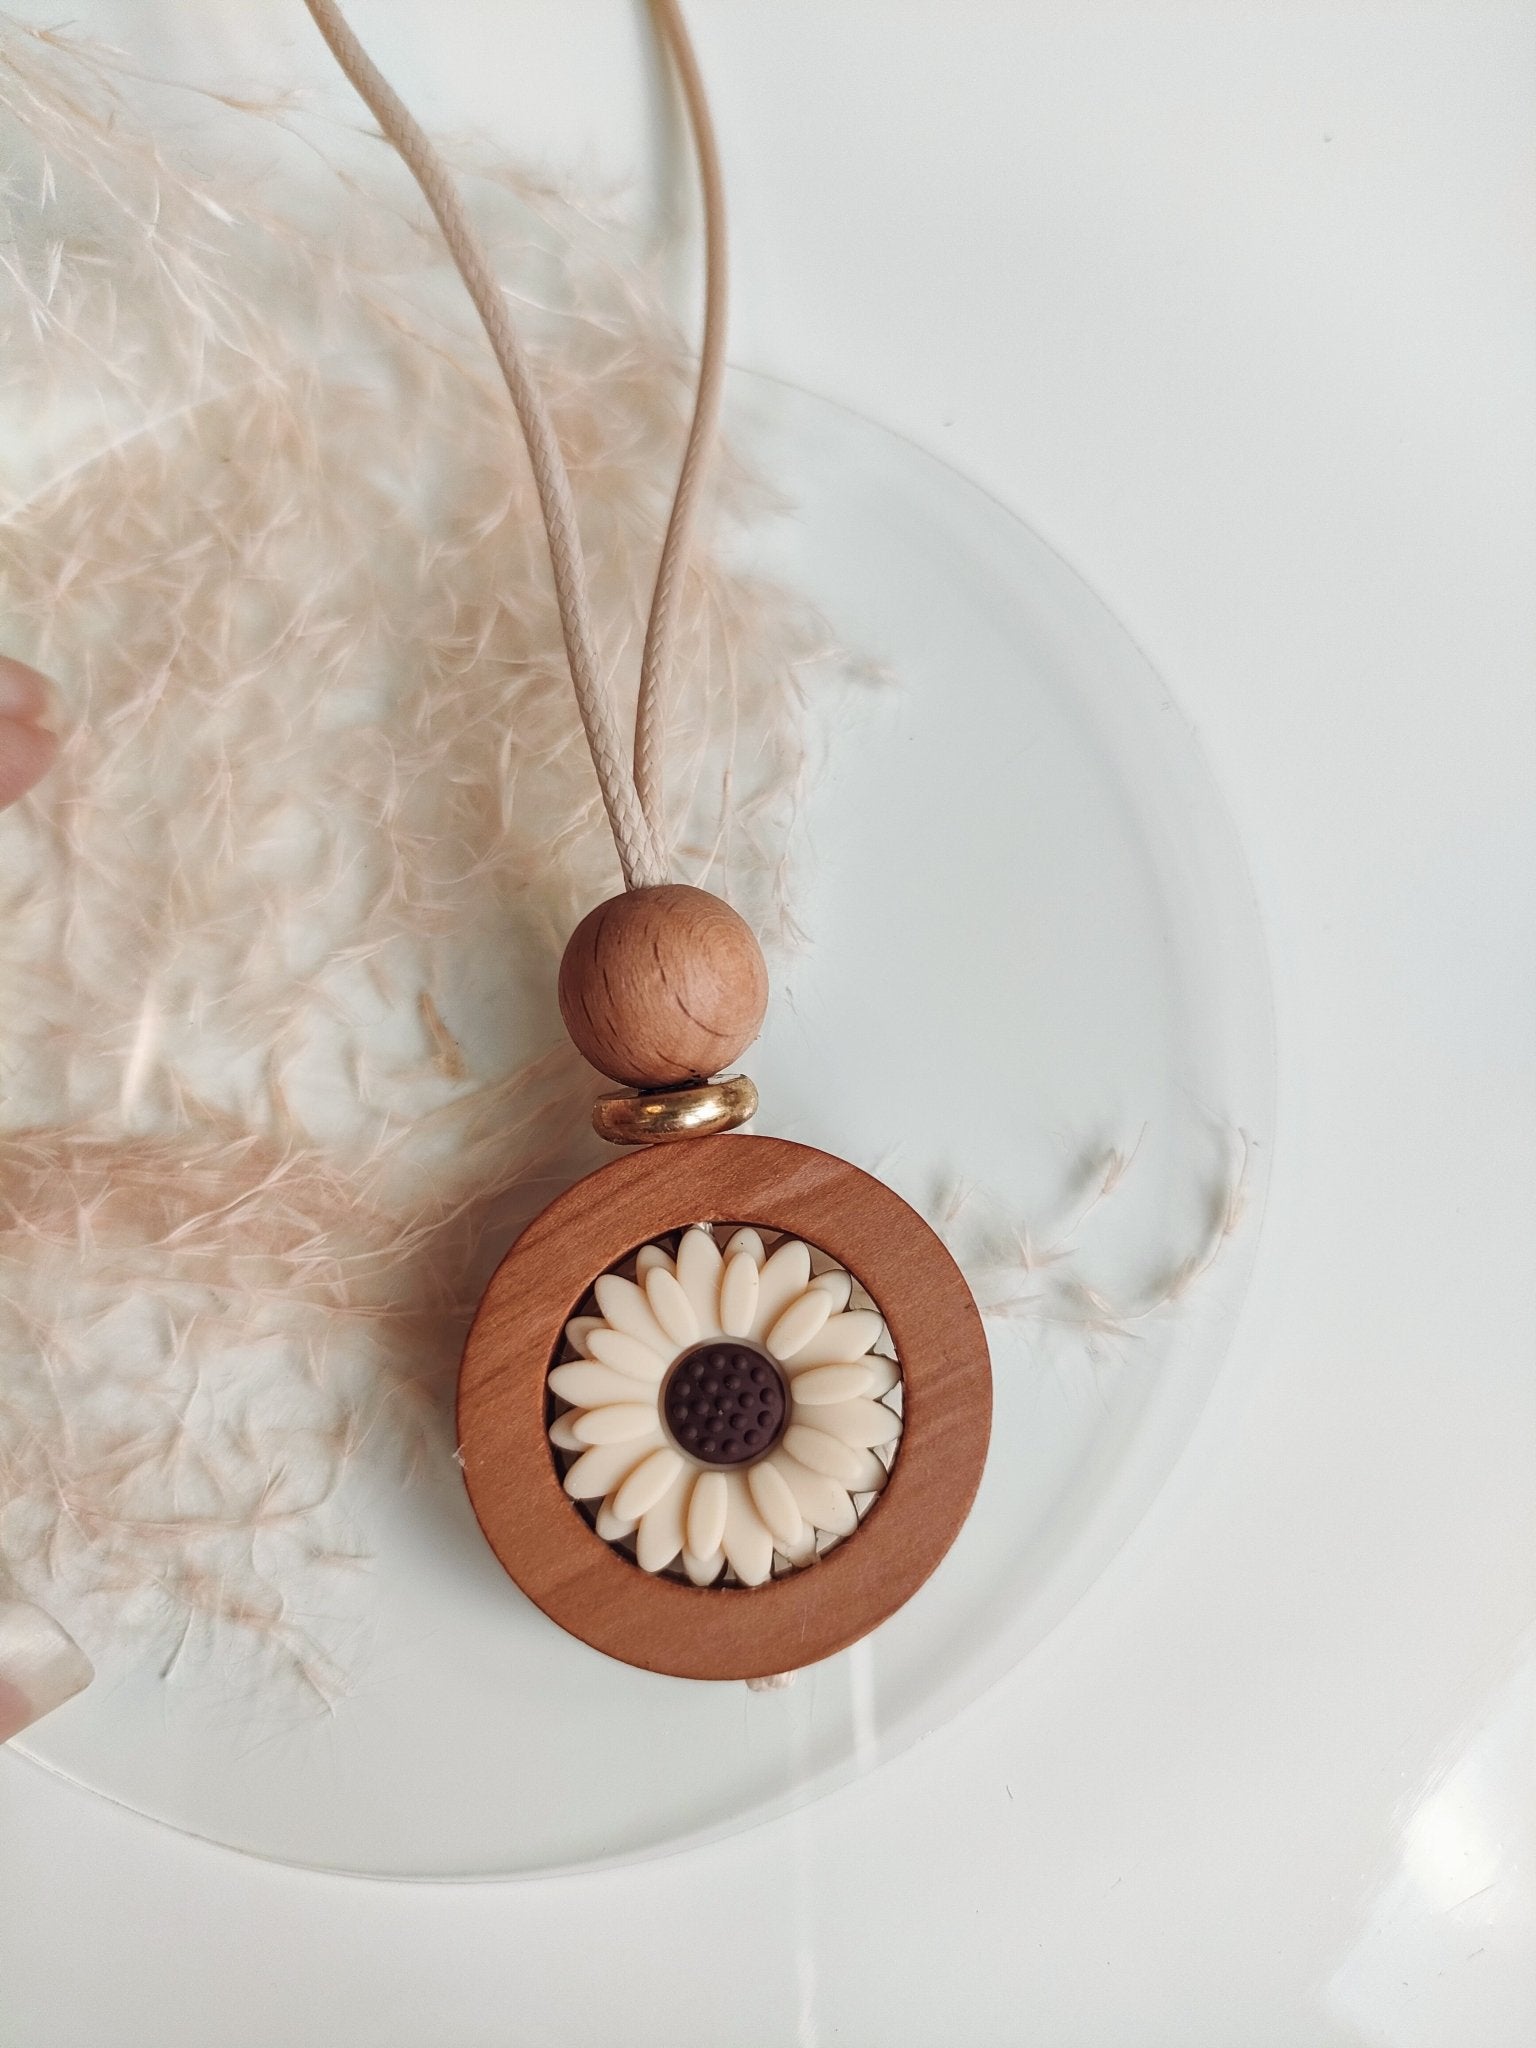 Halo Pendant - Bennie Blooms Breastfeeding, Teething and Fiddle Jewellery at its finest.